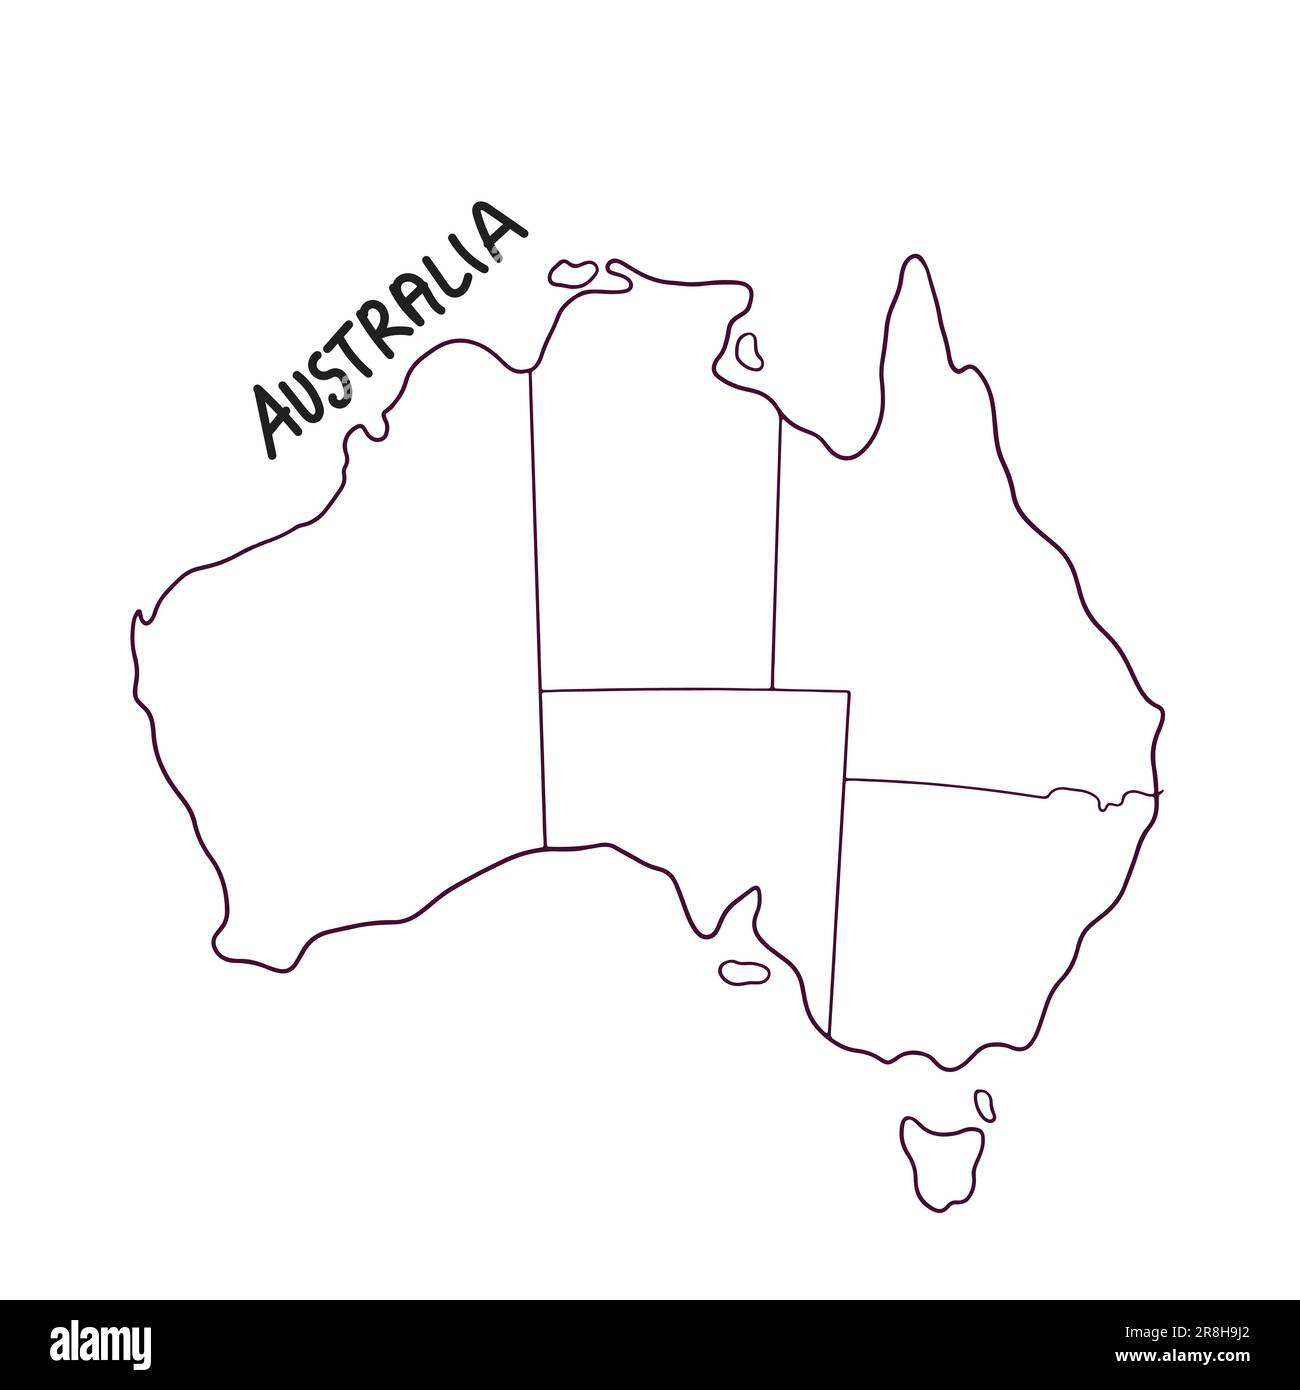 hand drawn doodle map of Australia Stock Vector